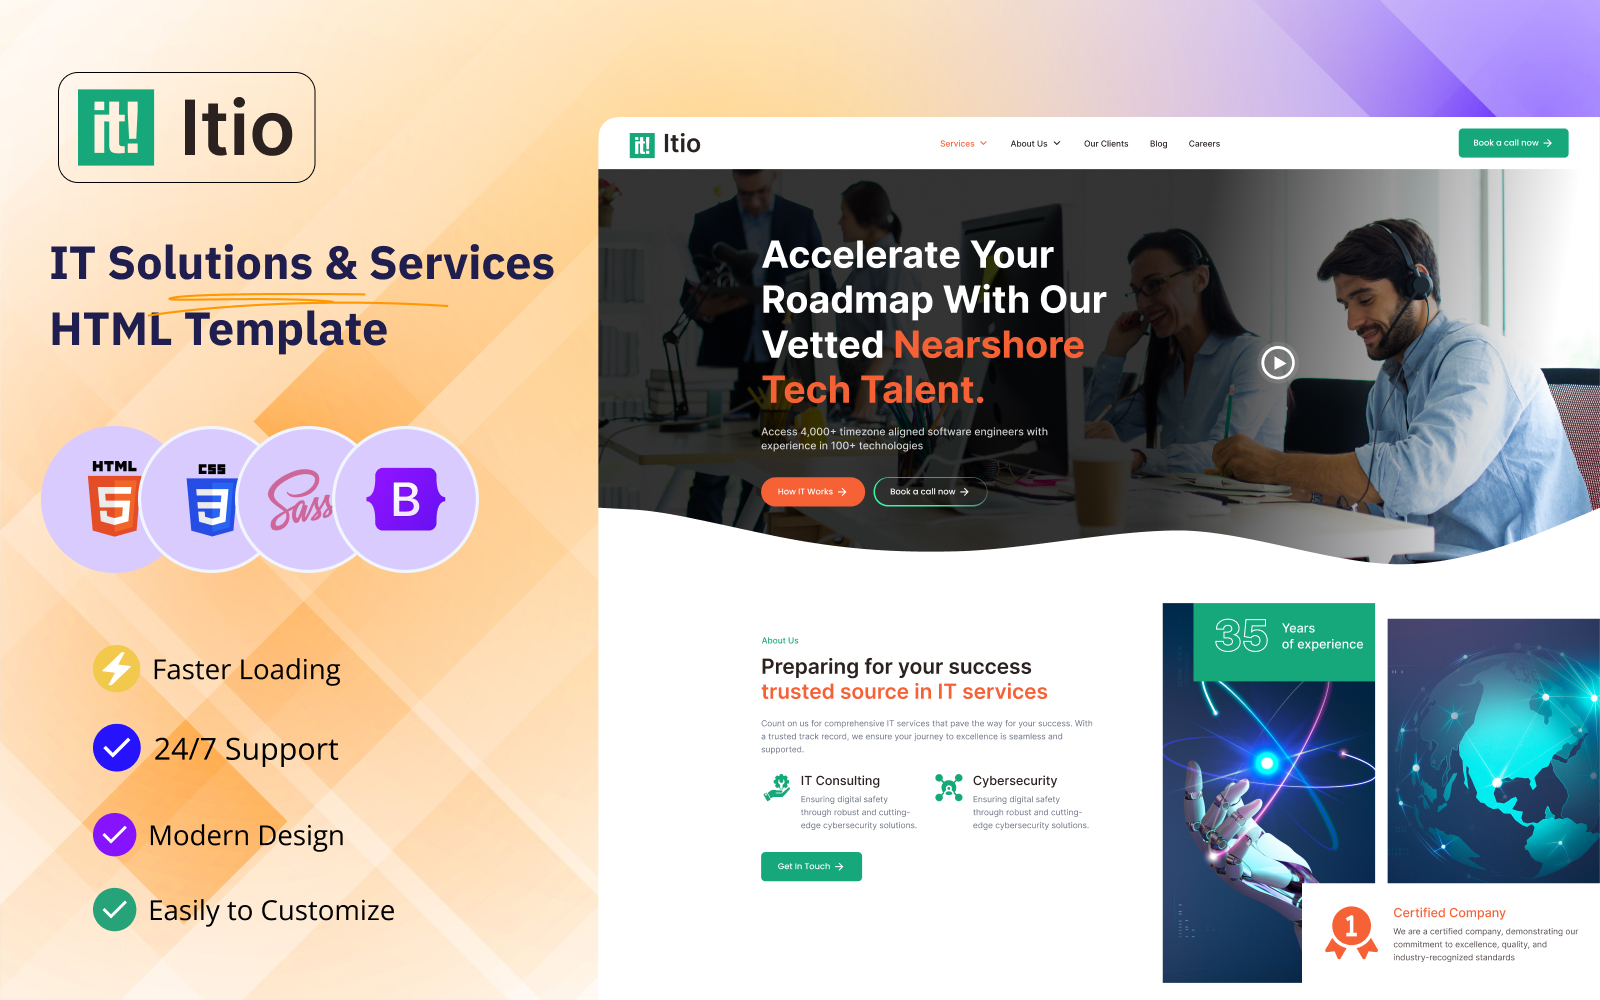 Itio - IT Solutions and Services HTML Template